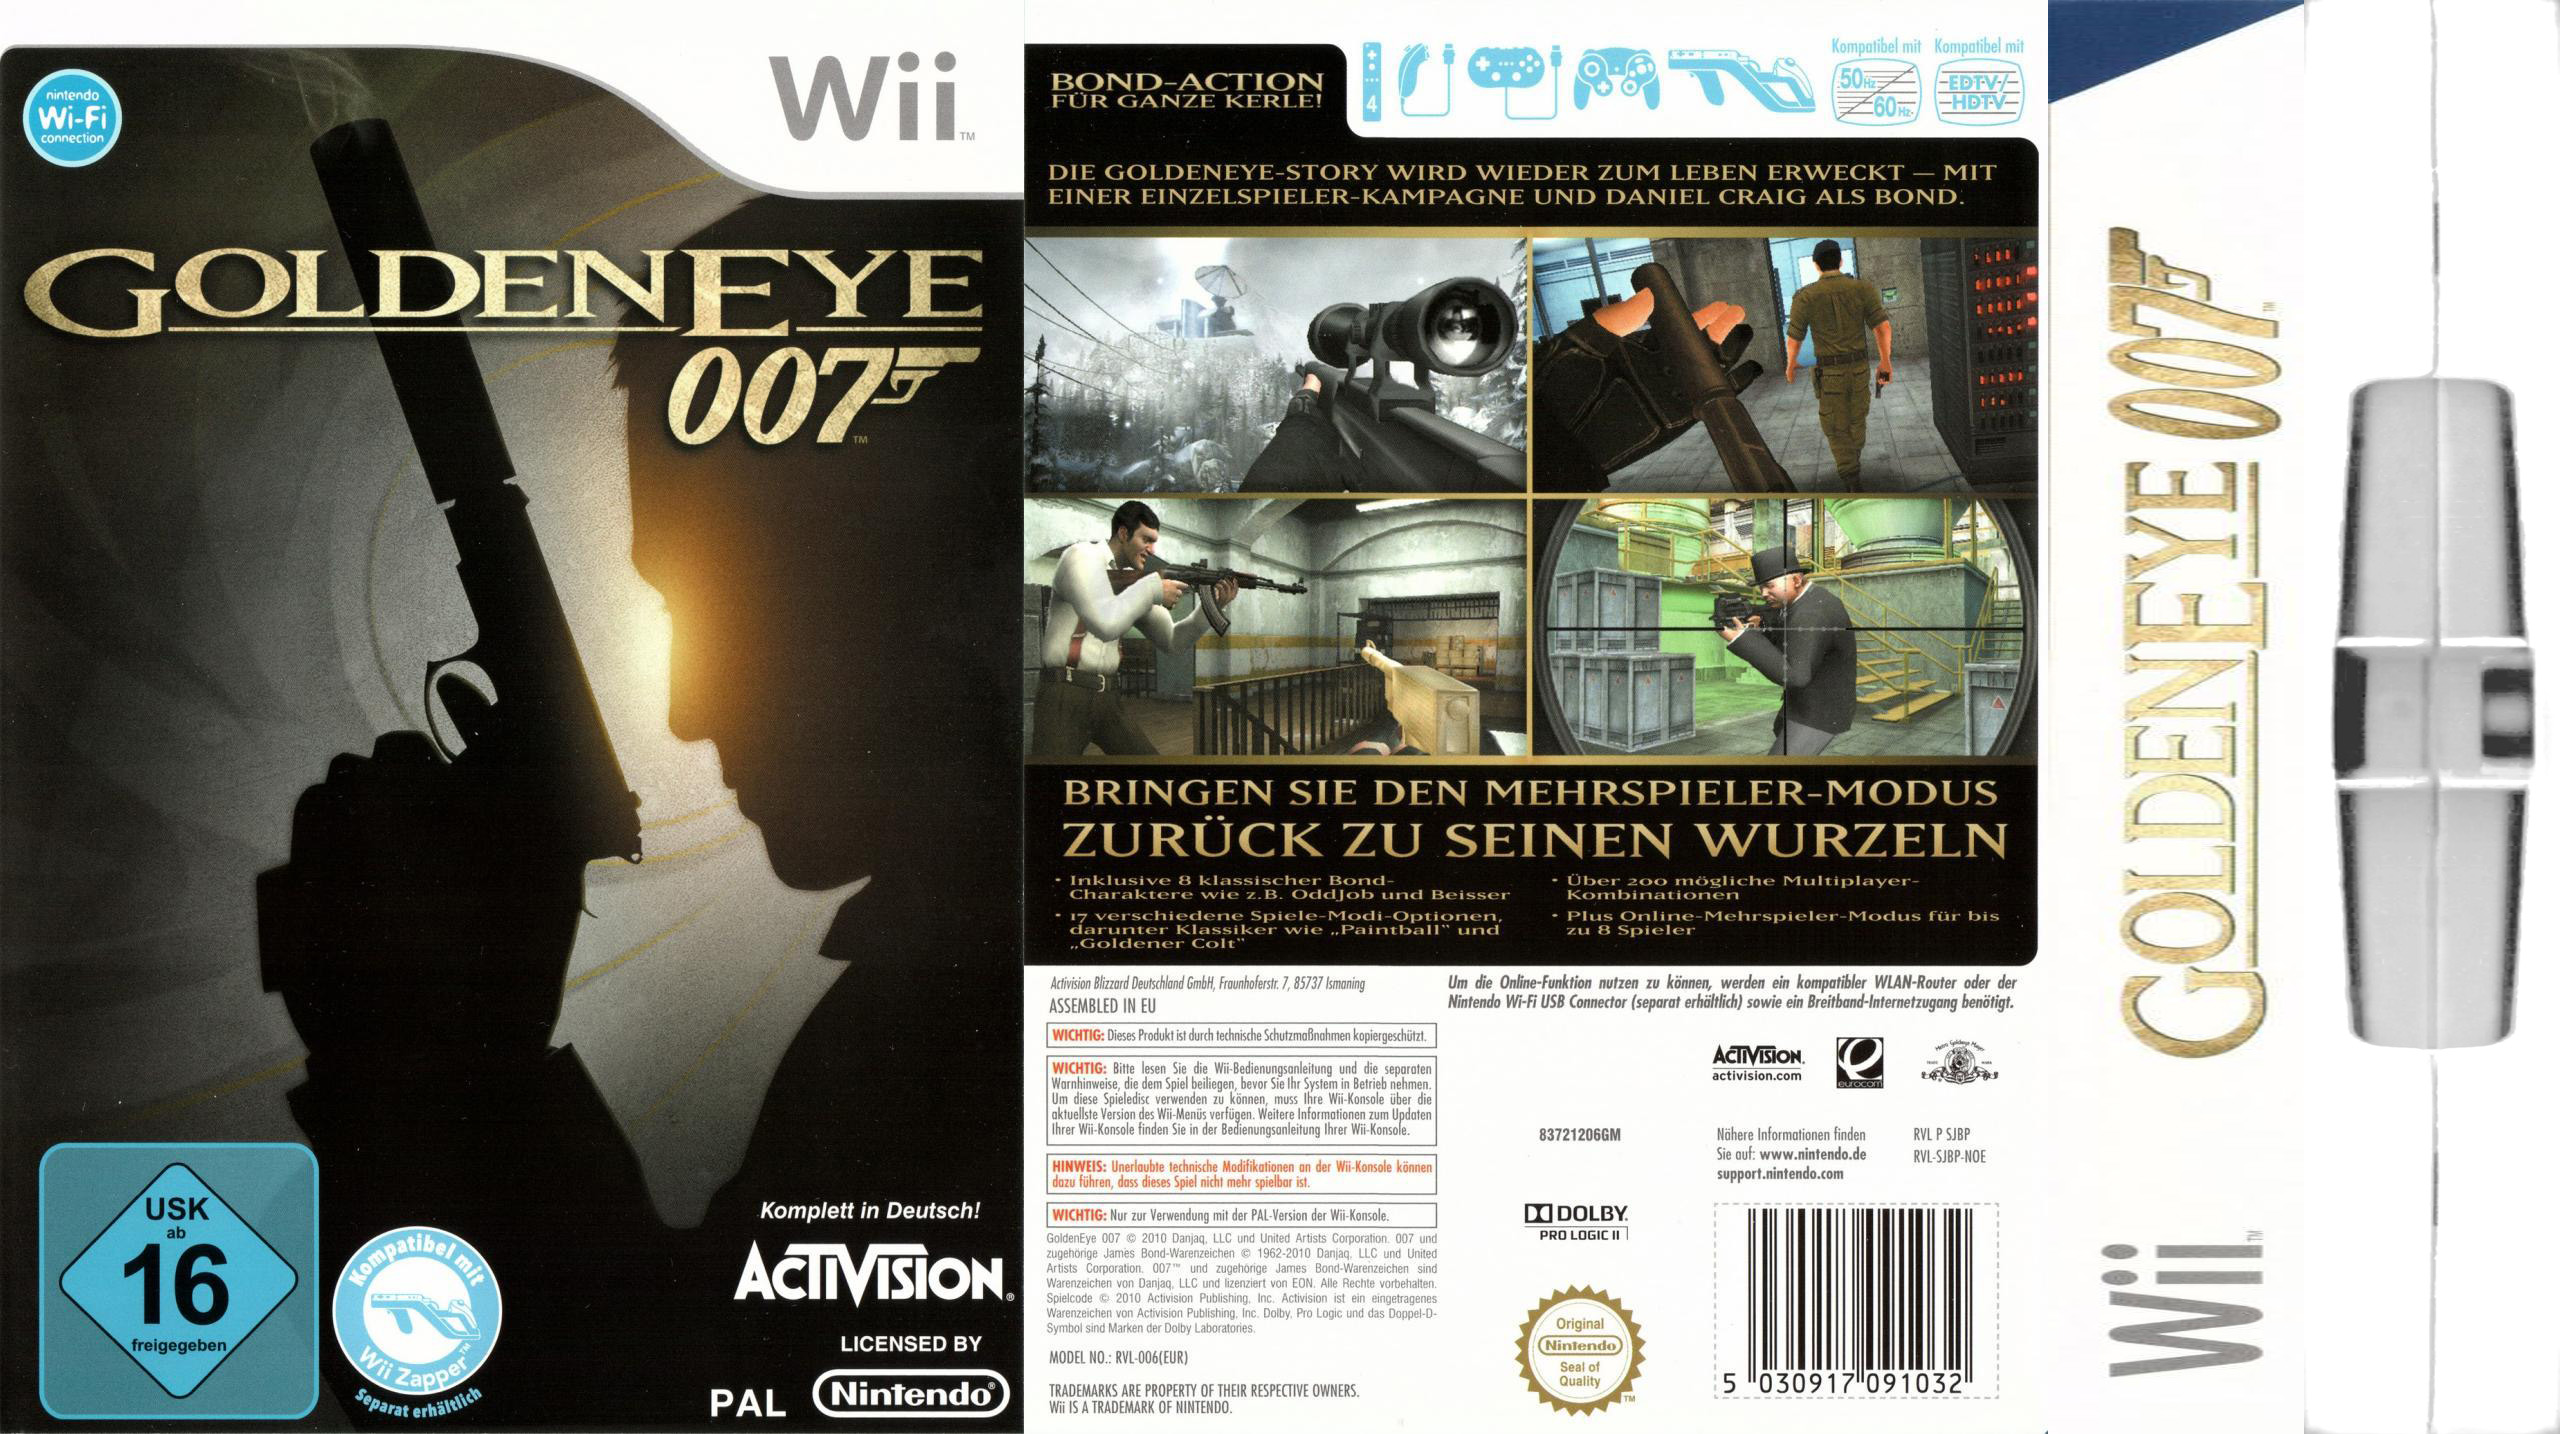 Big Box Collection: Papercraft model for Goldeneye 007 (Wii, 2010)